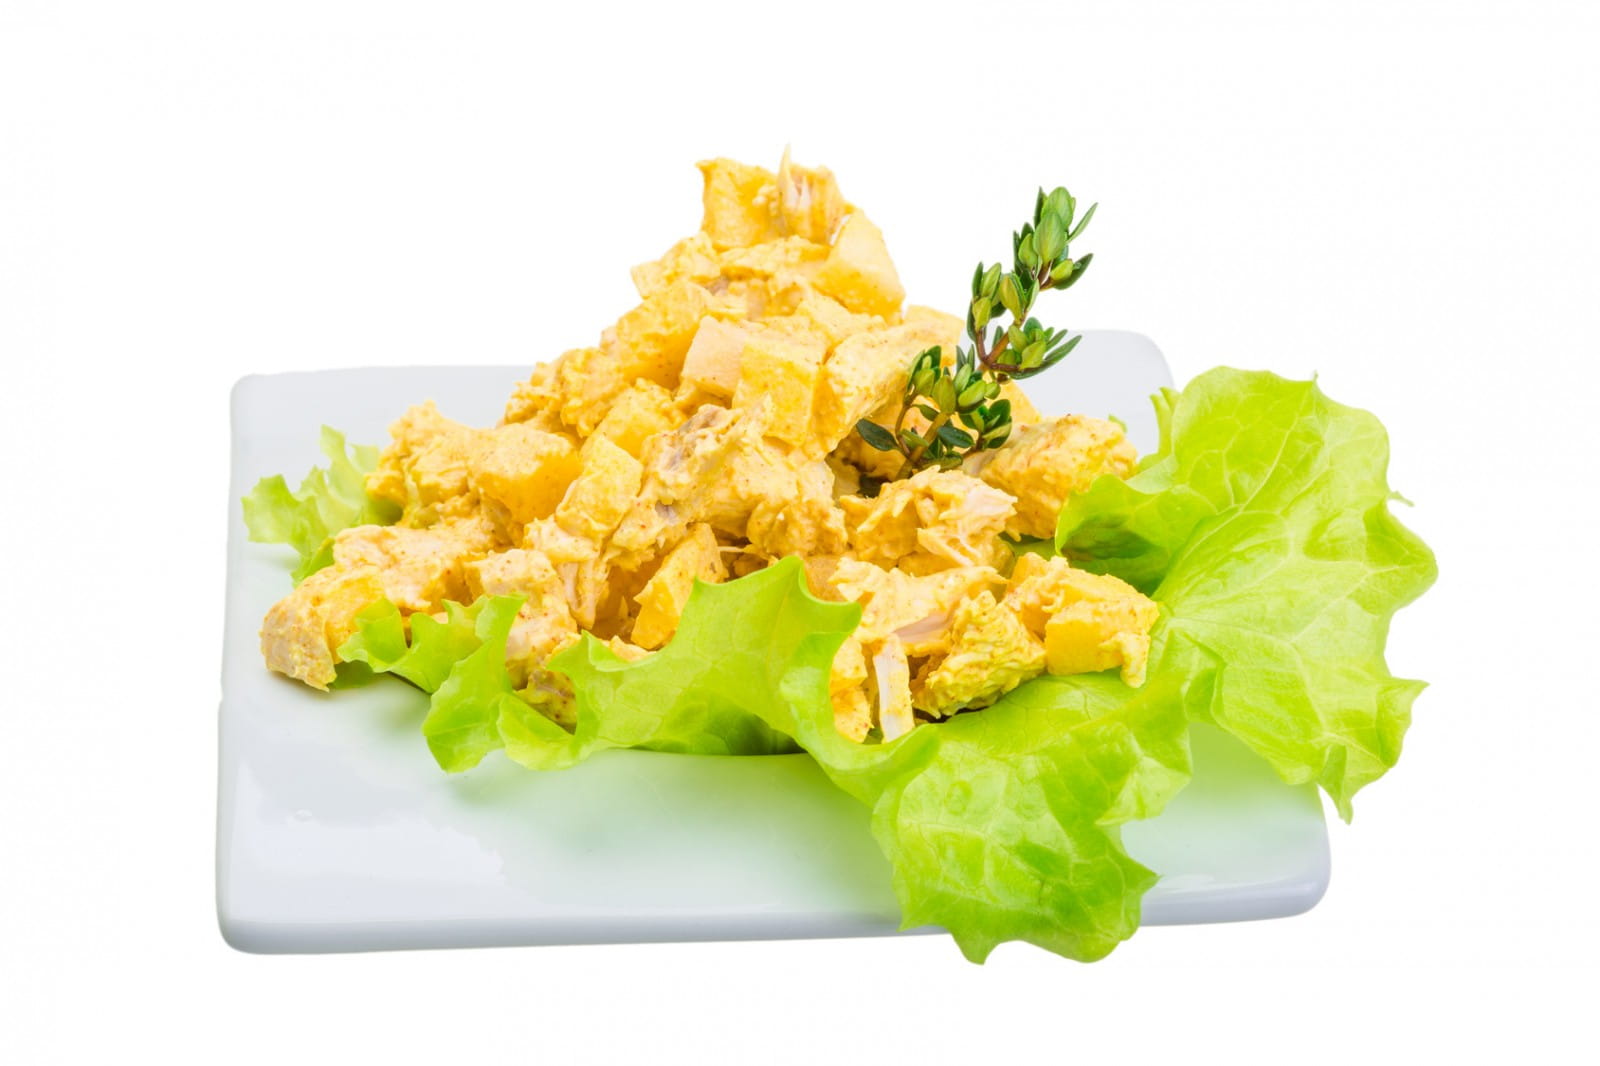 What to pair with Coronation chicken?